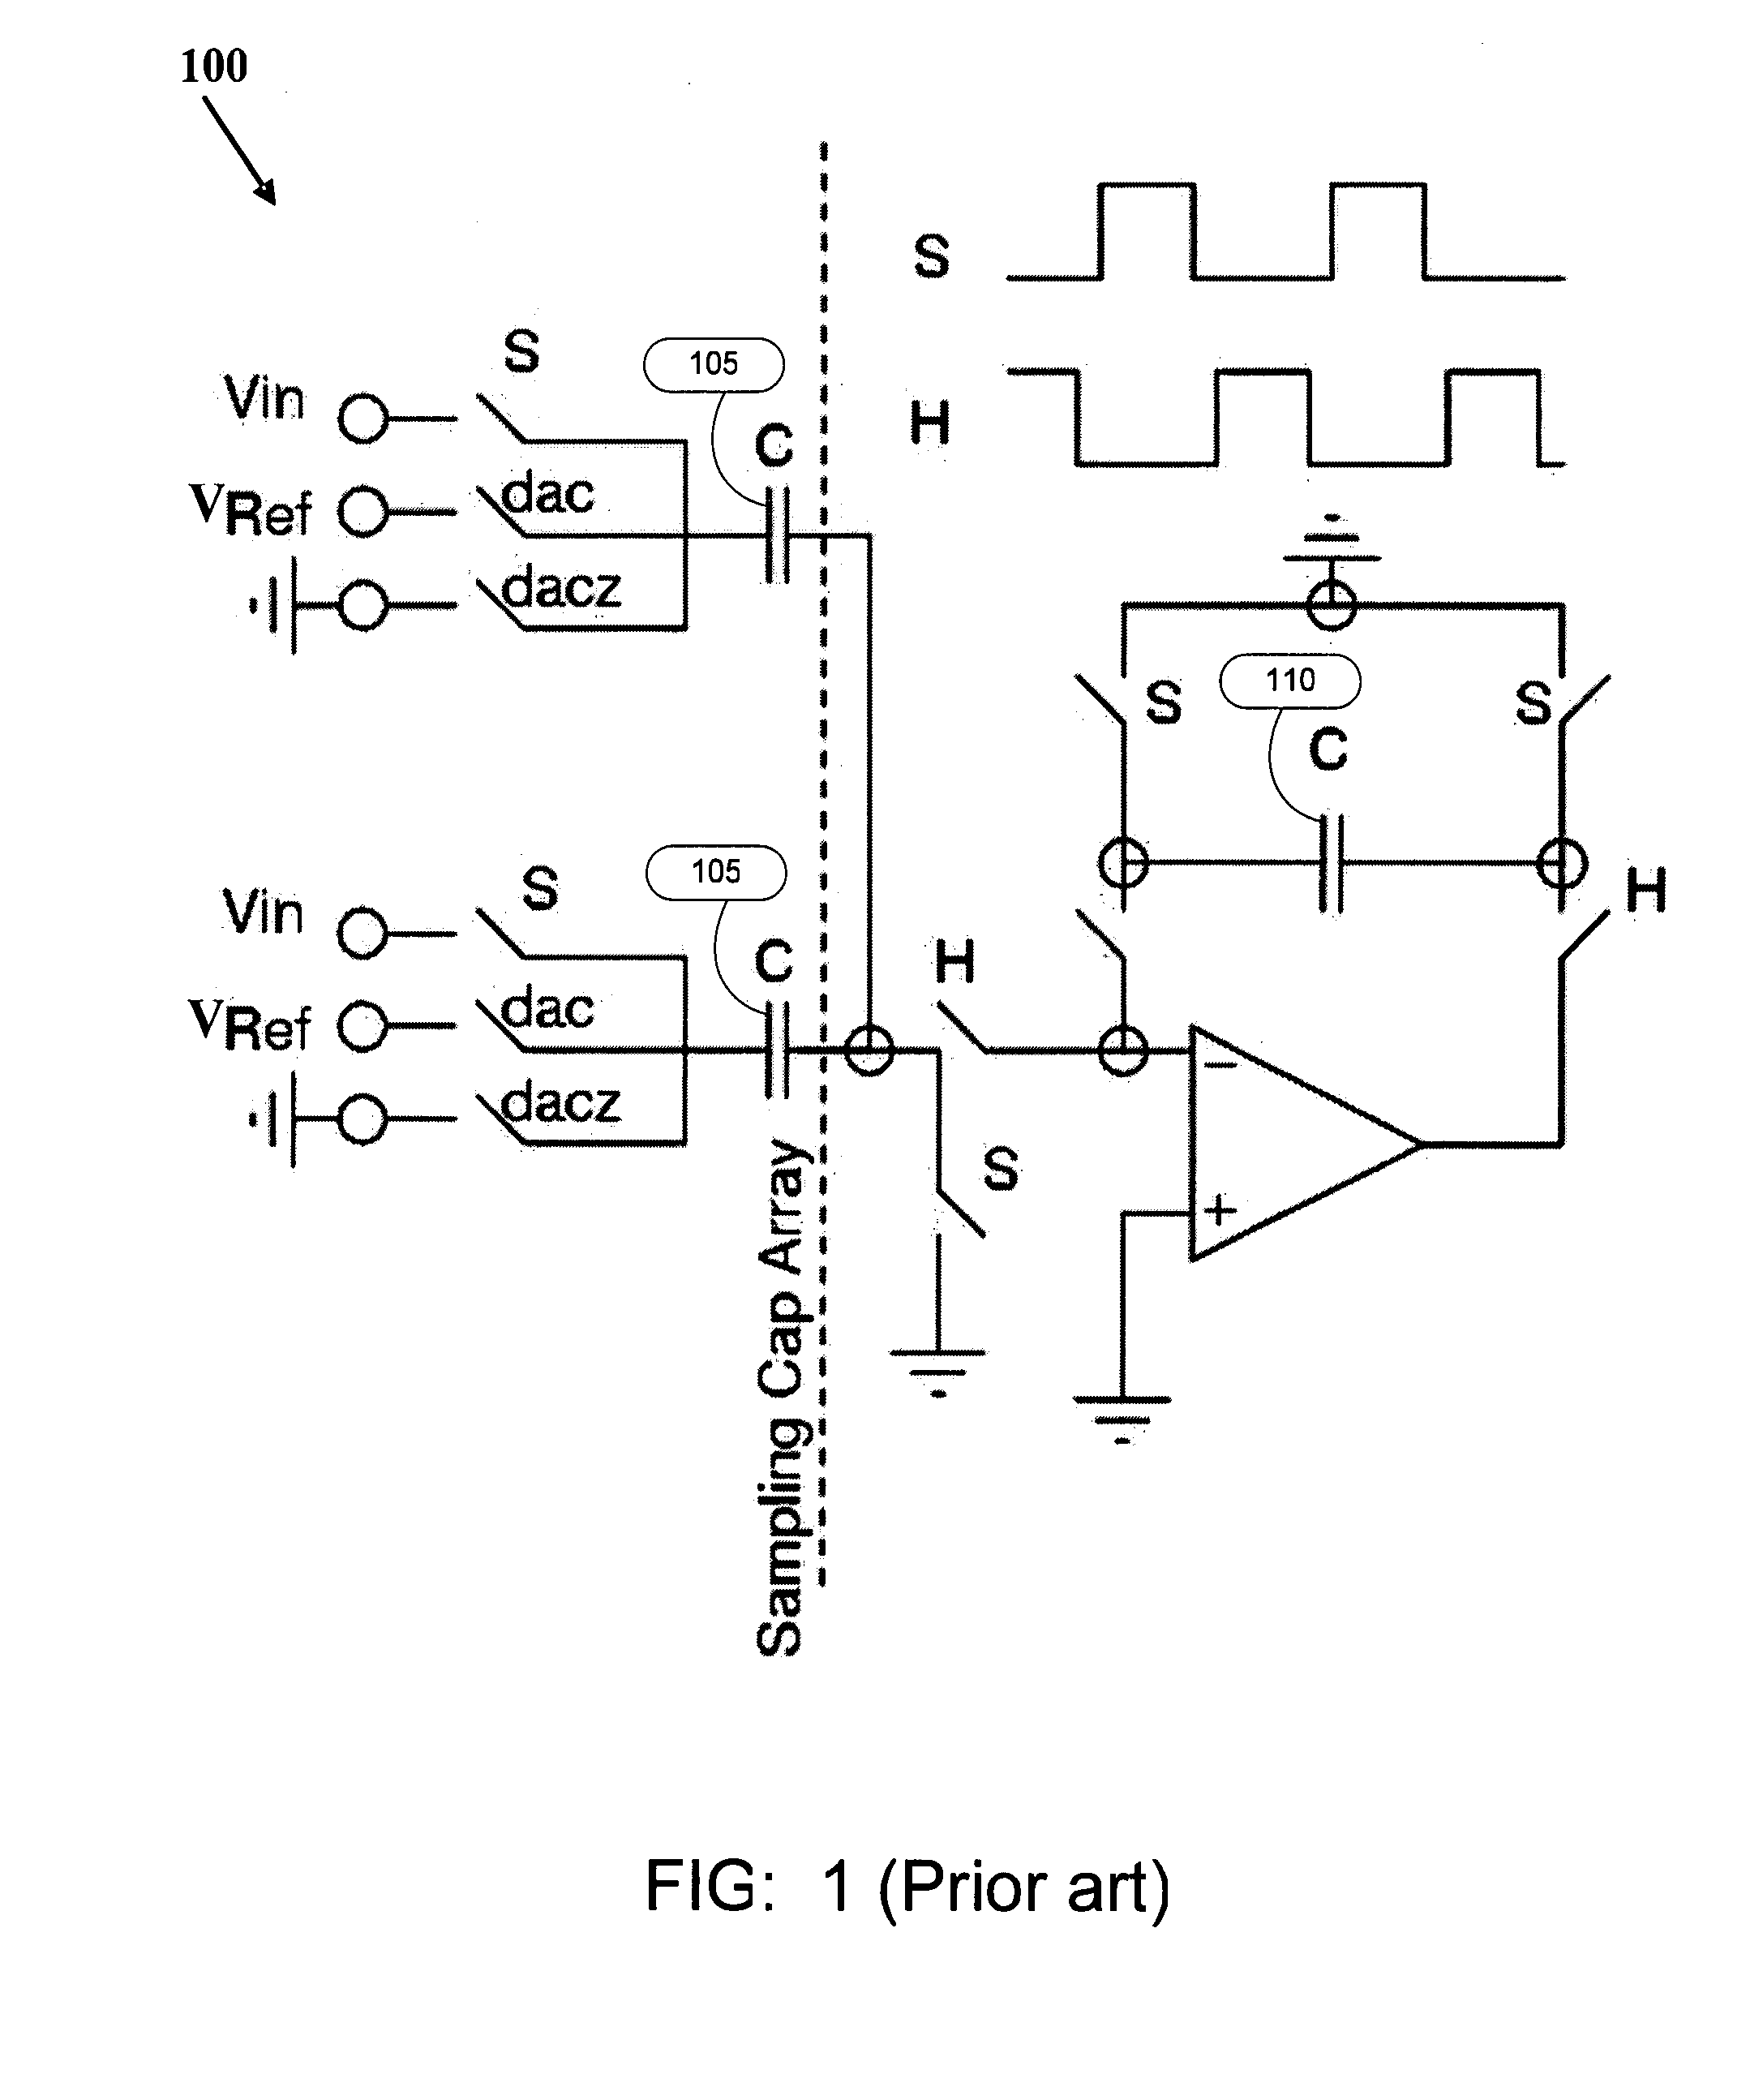 Methods and systems for designing high resolution analog to digital converters